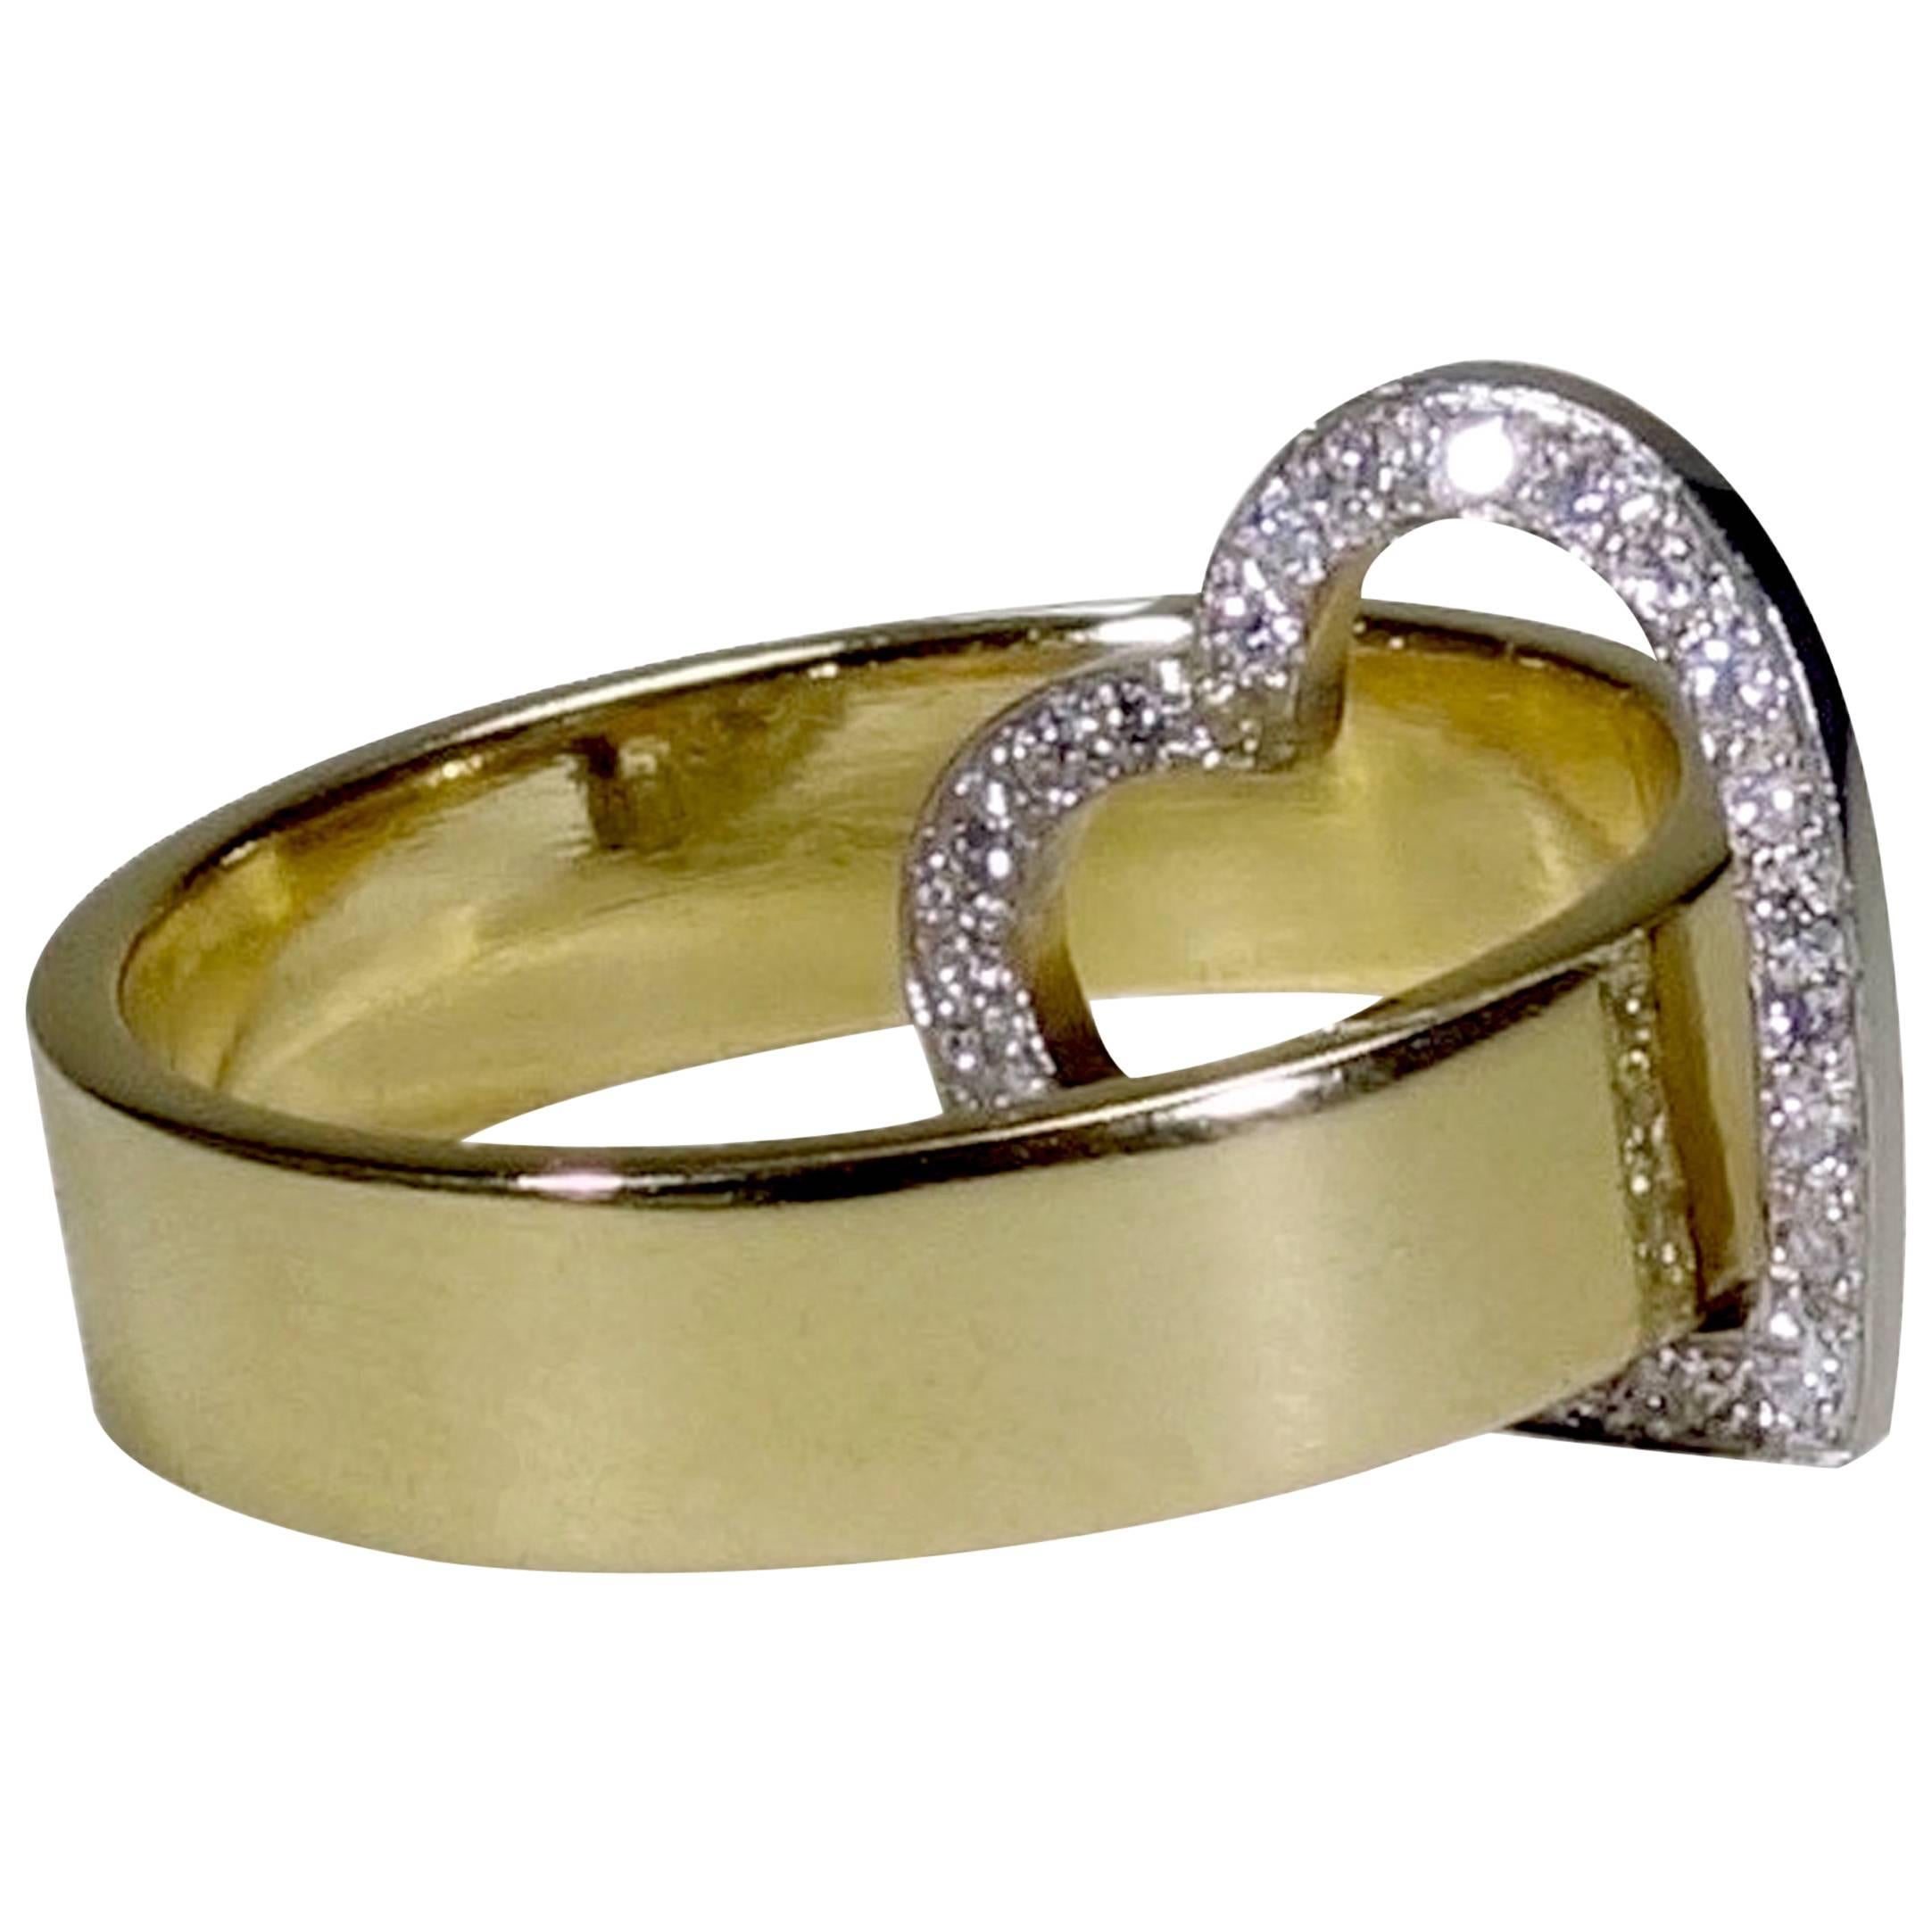 18 Karat Gold Band Ring with a Playful Movable Pave' Diamond Heart Element